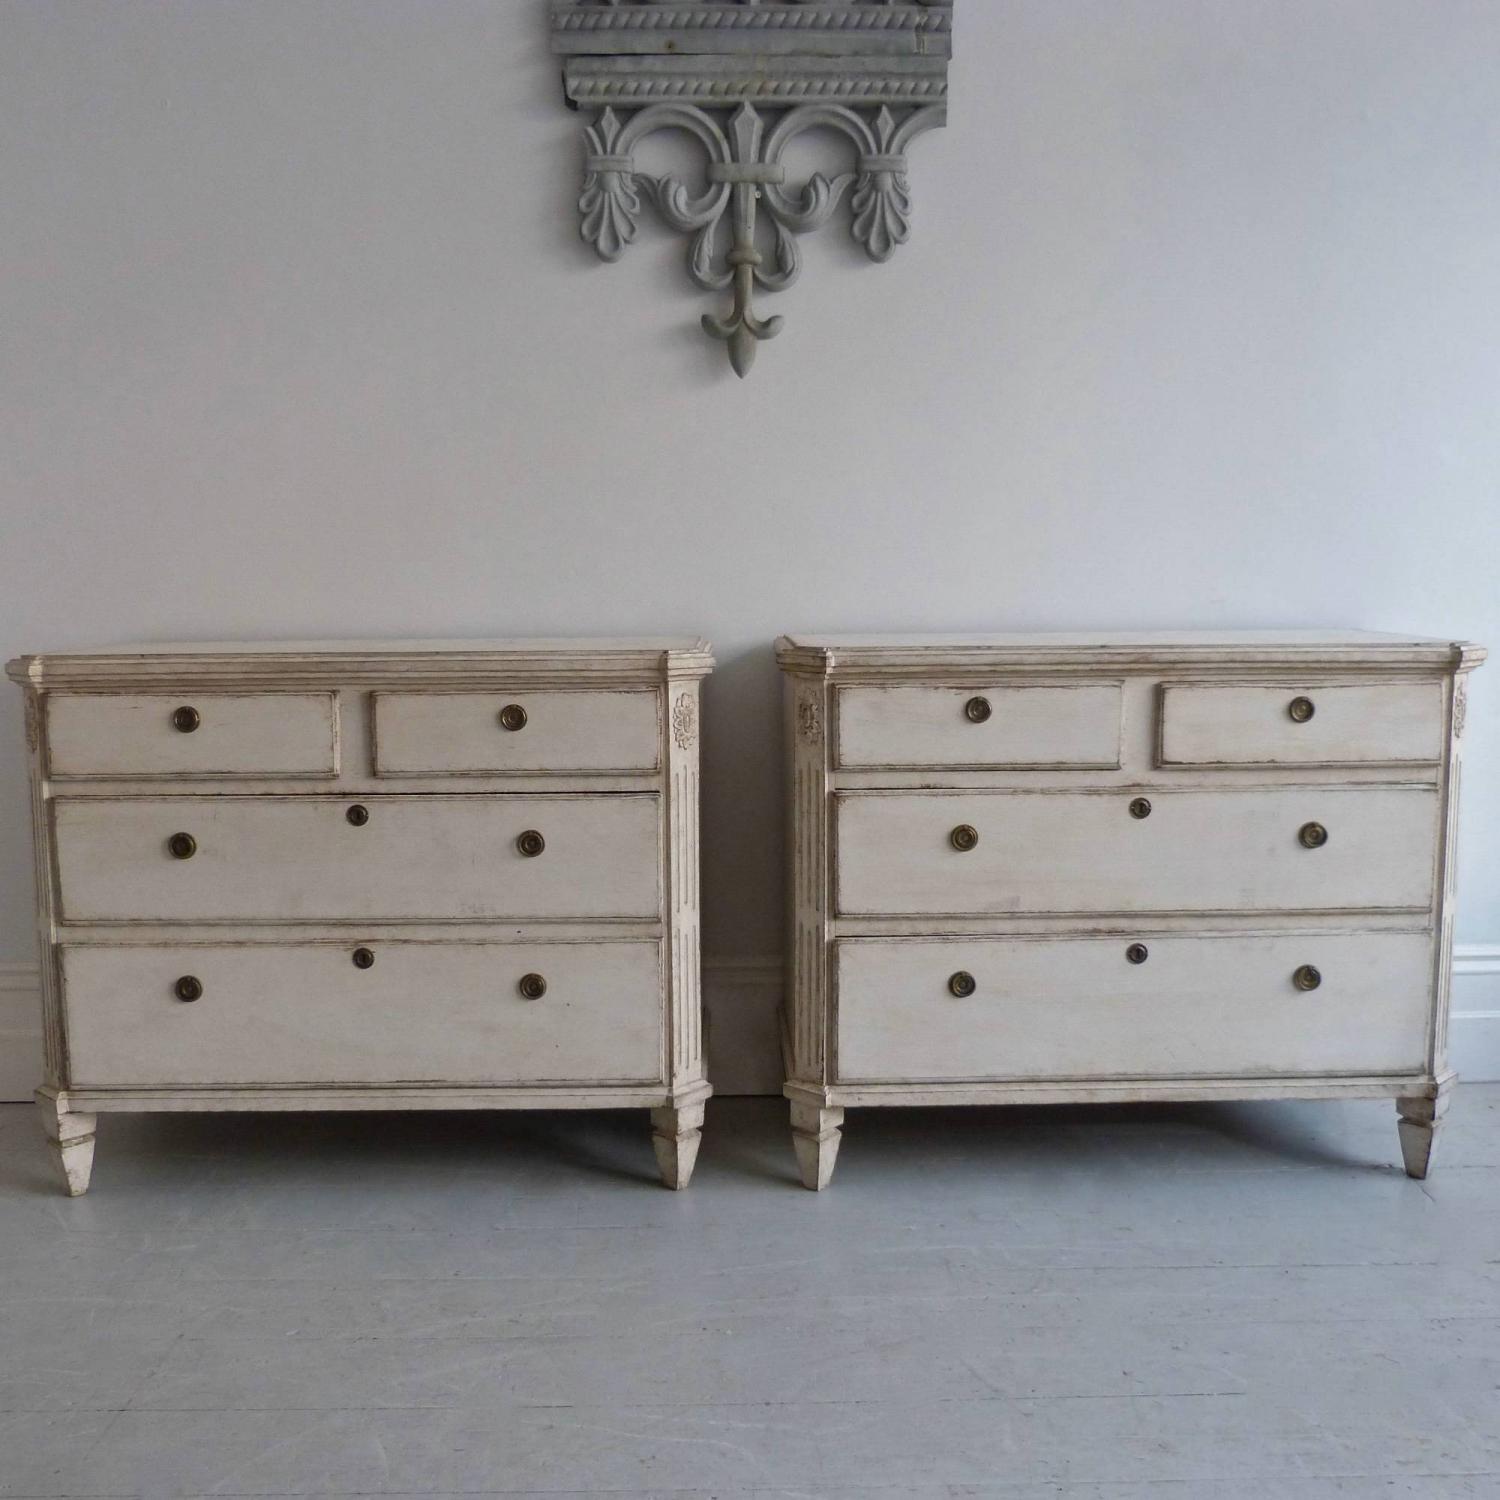 PAIR OF LARGE SWEDISH GUSTAVIAN PERIOD COMMODES